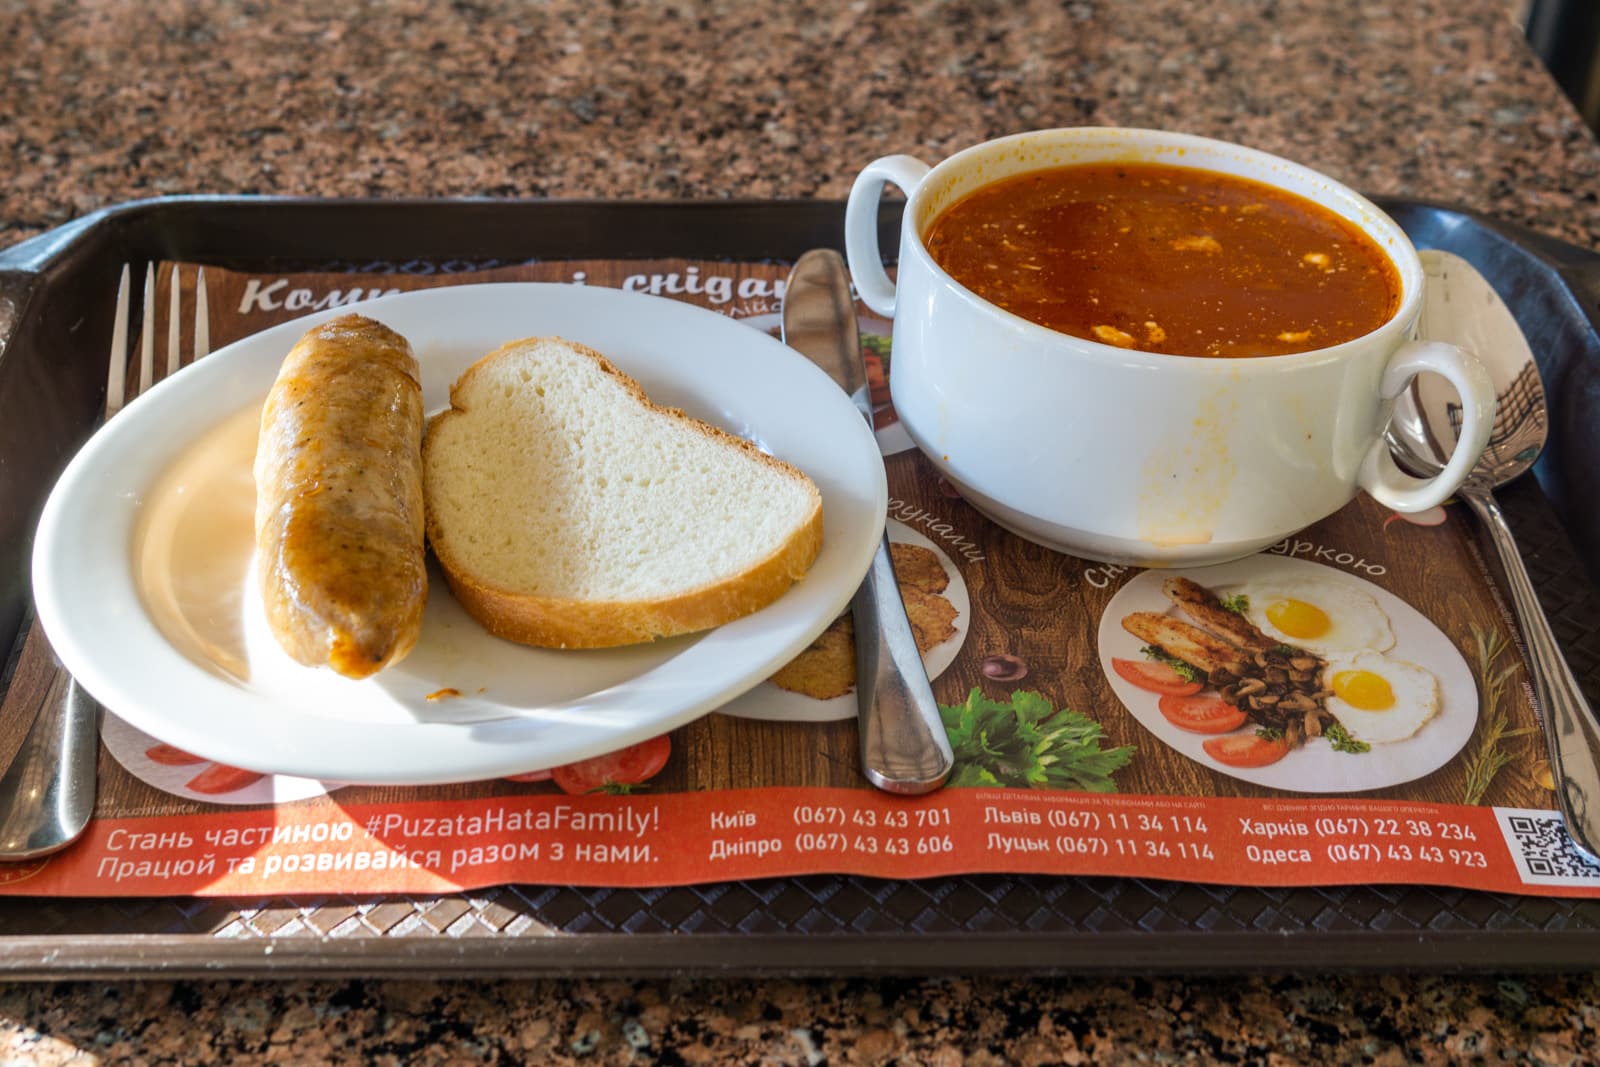 A typical cafeteria meal in Ukraine with sausage and borsch and bread